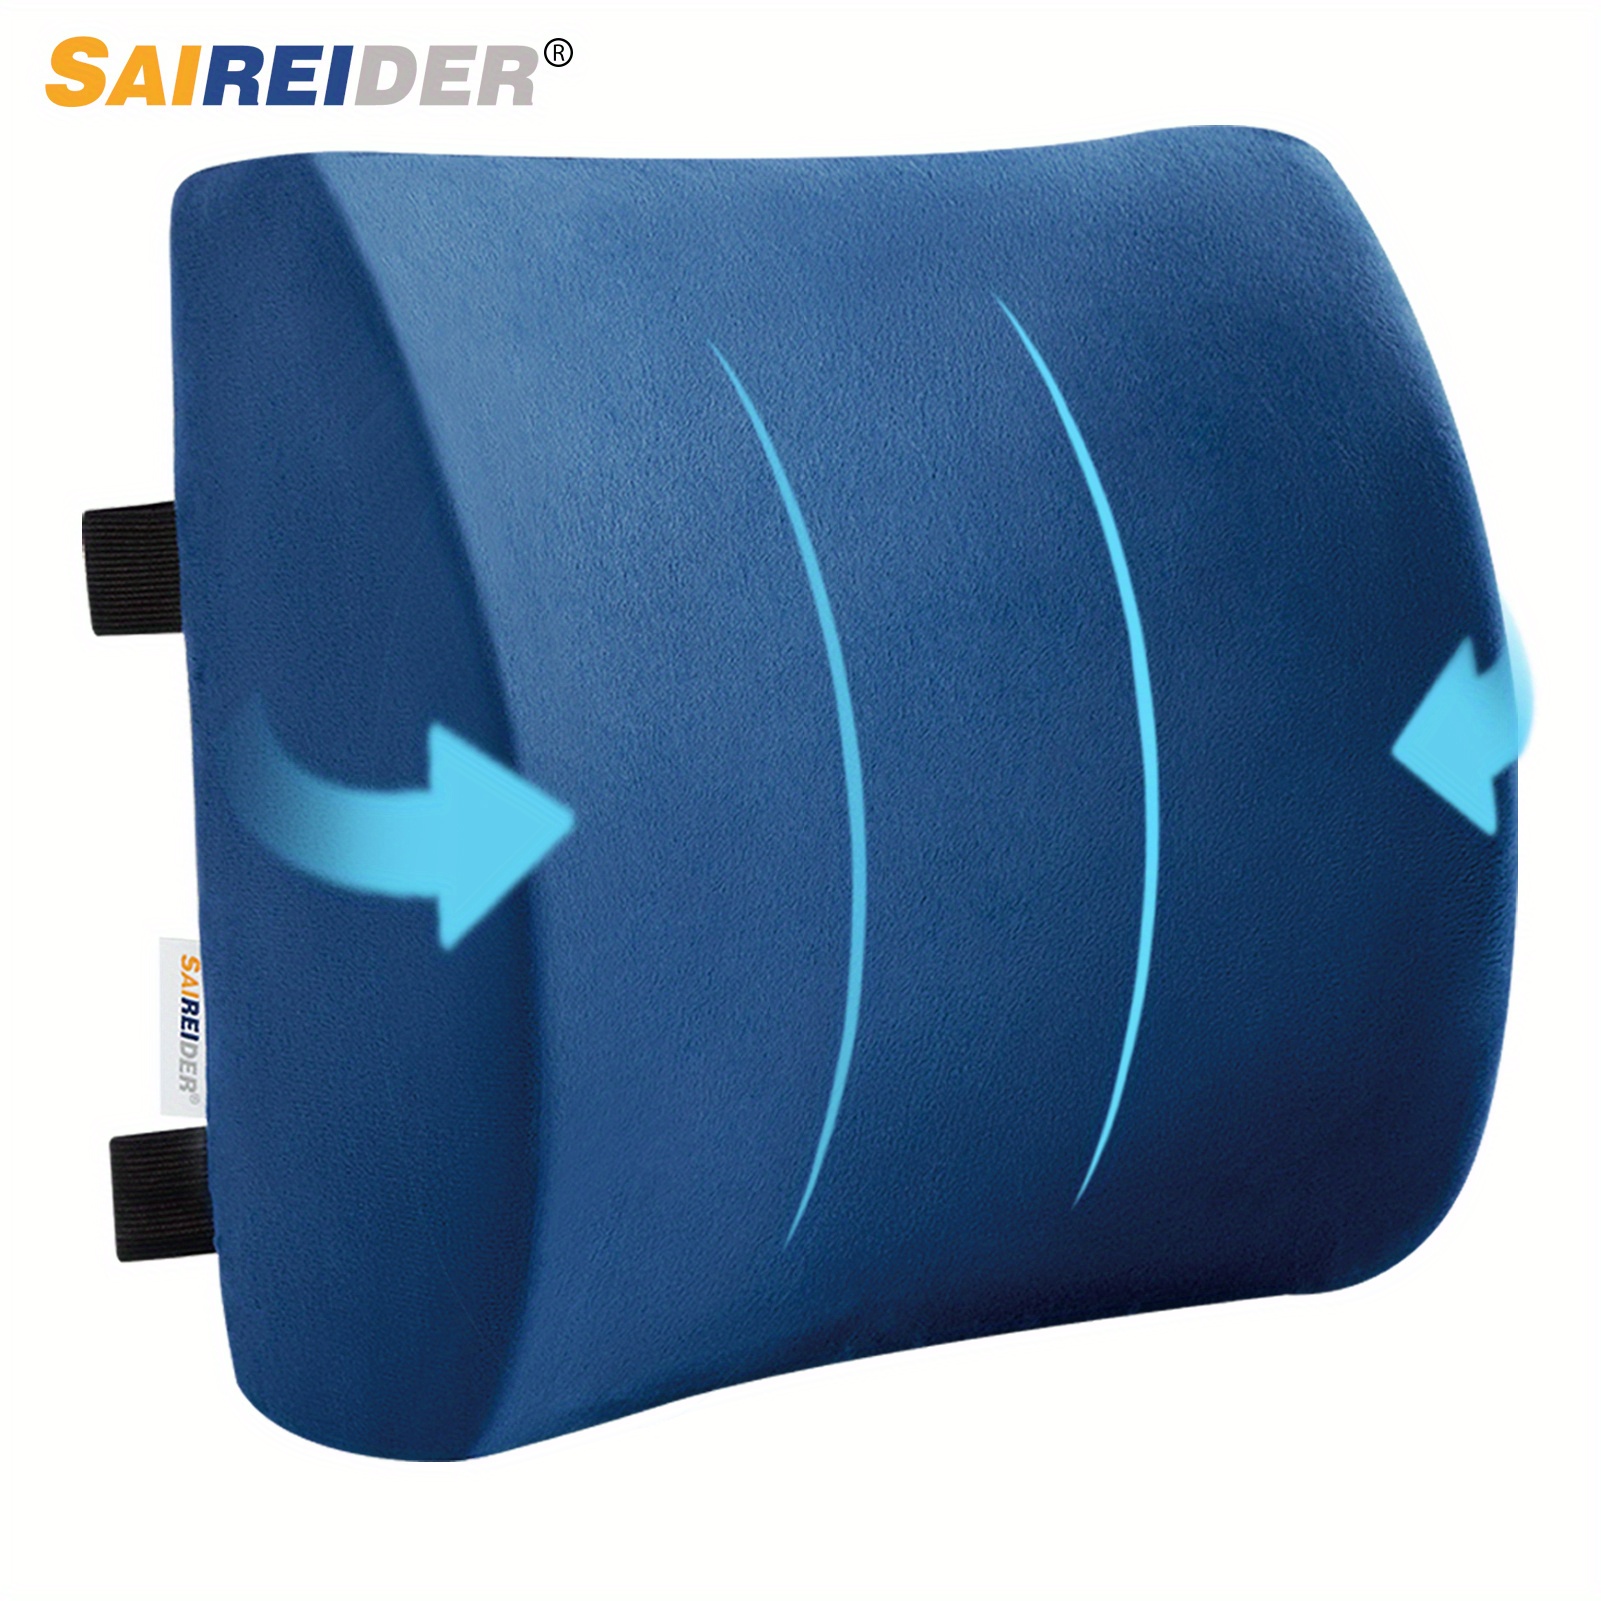 SAIREIDER Seat Cushion and Lumbar Support Pillow for Office Chair, Memory  Foam Car Seat Cushions Back Support Pillows, Help Relieve Pain of Back